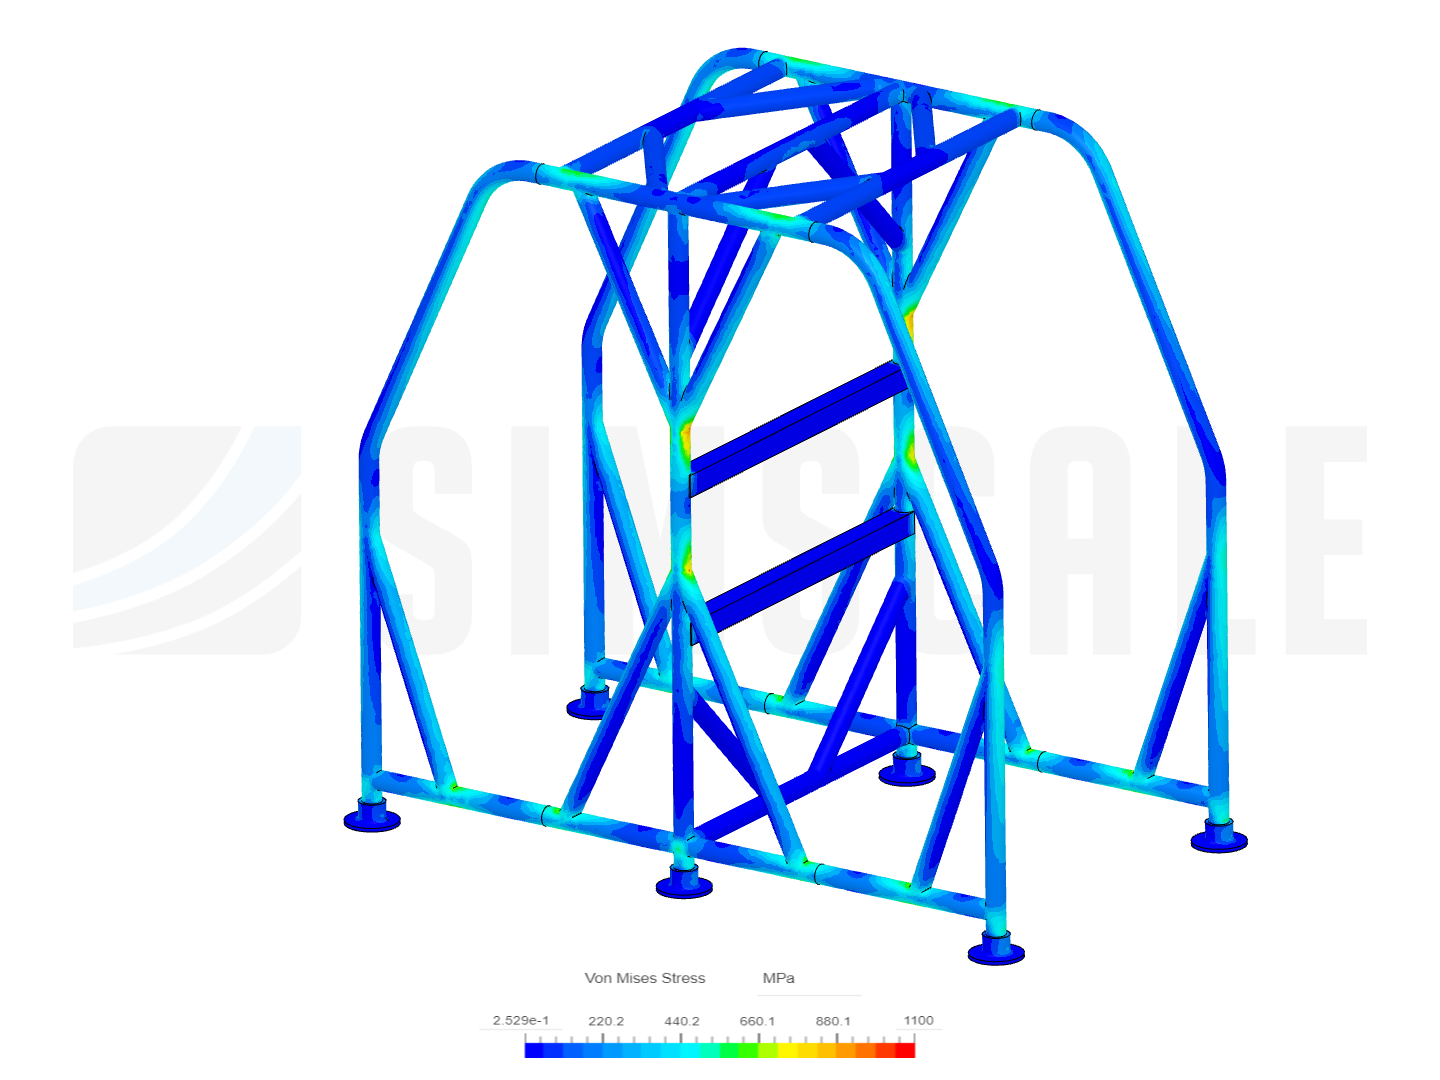 Roll Cage Analysis 2 image